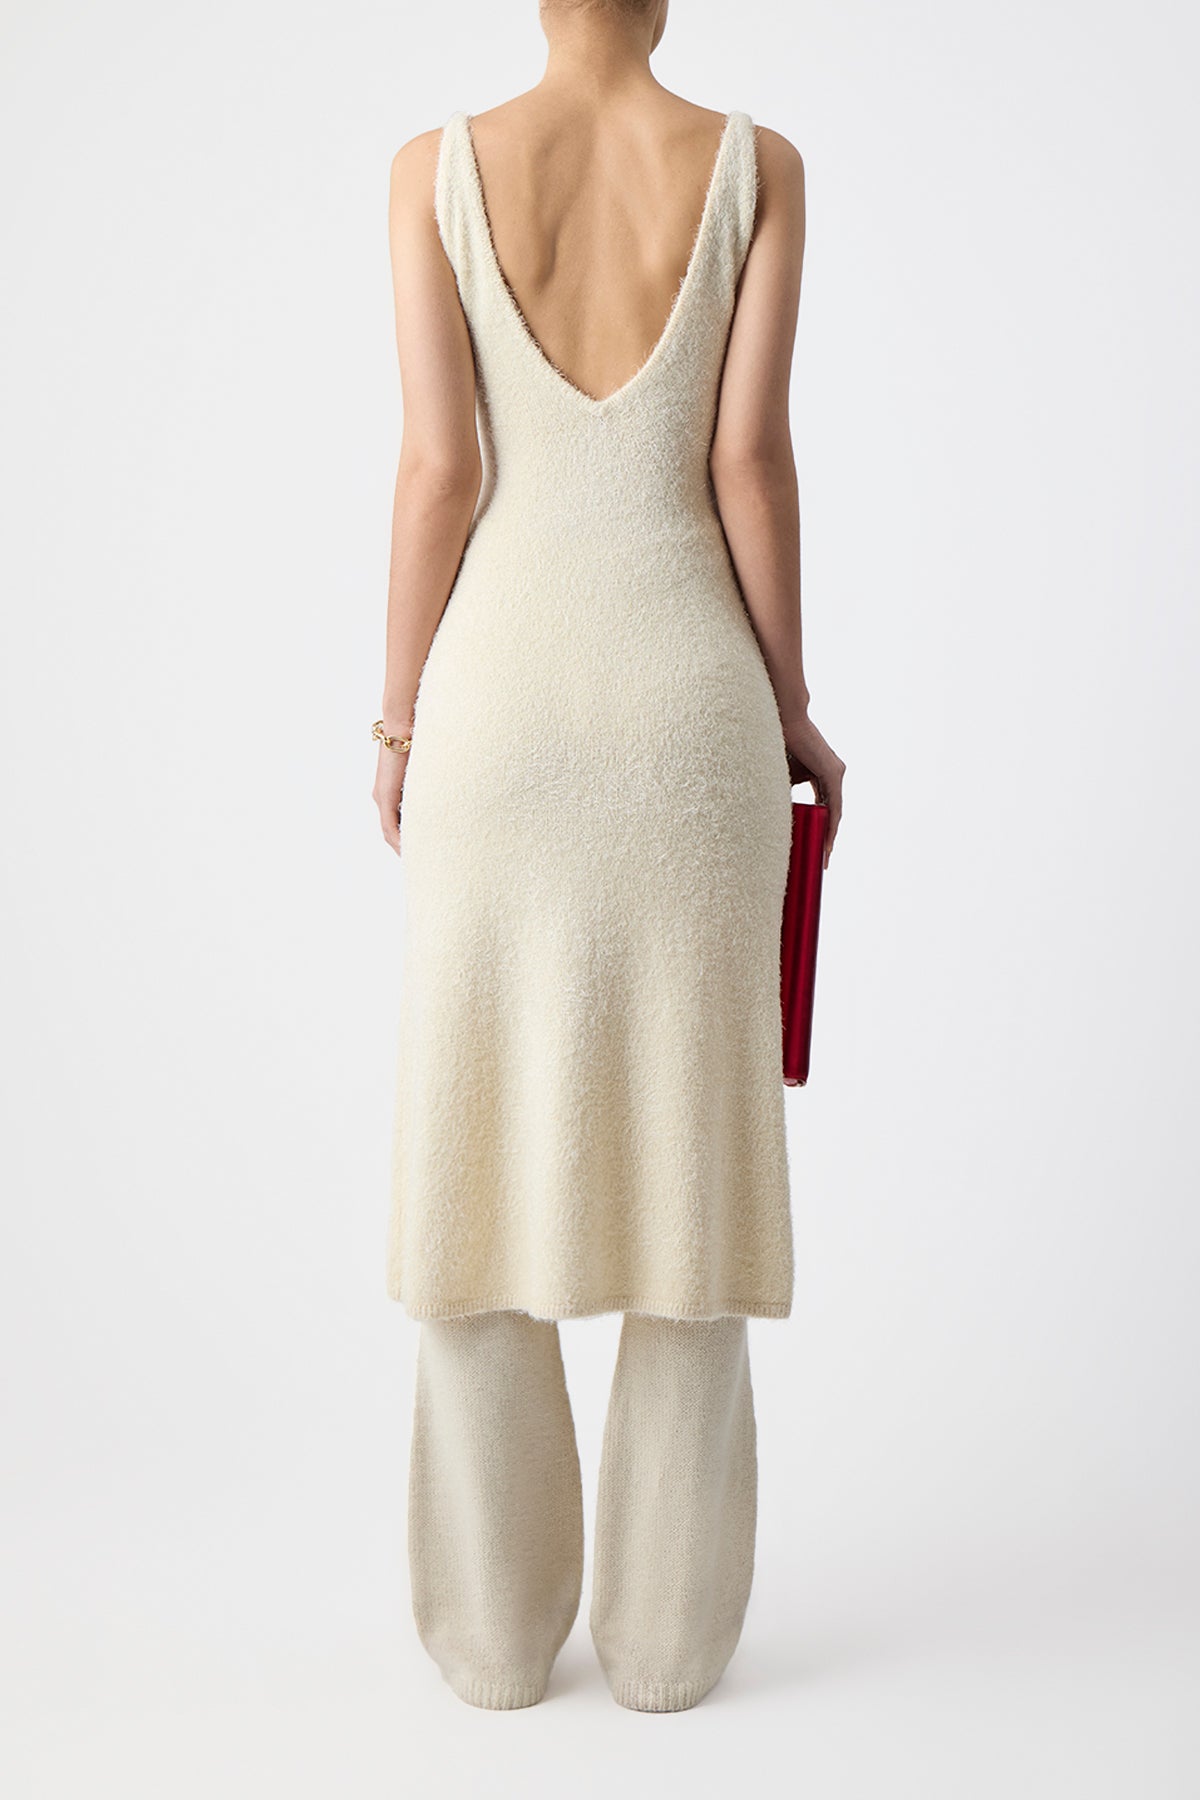 Downs Knit Dress in Ivory Silk Cashmere